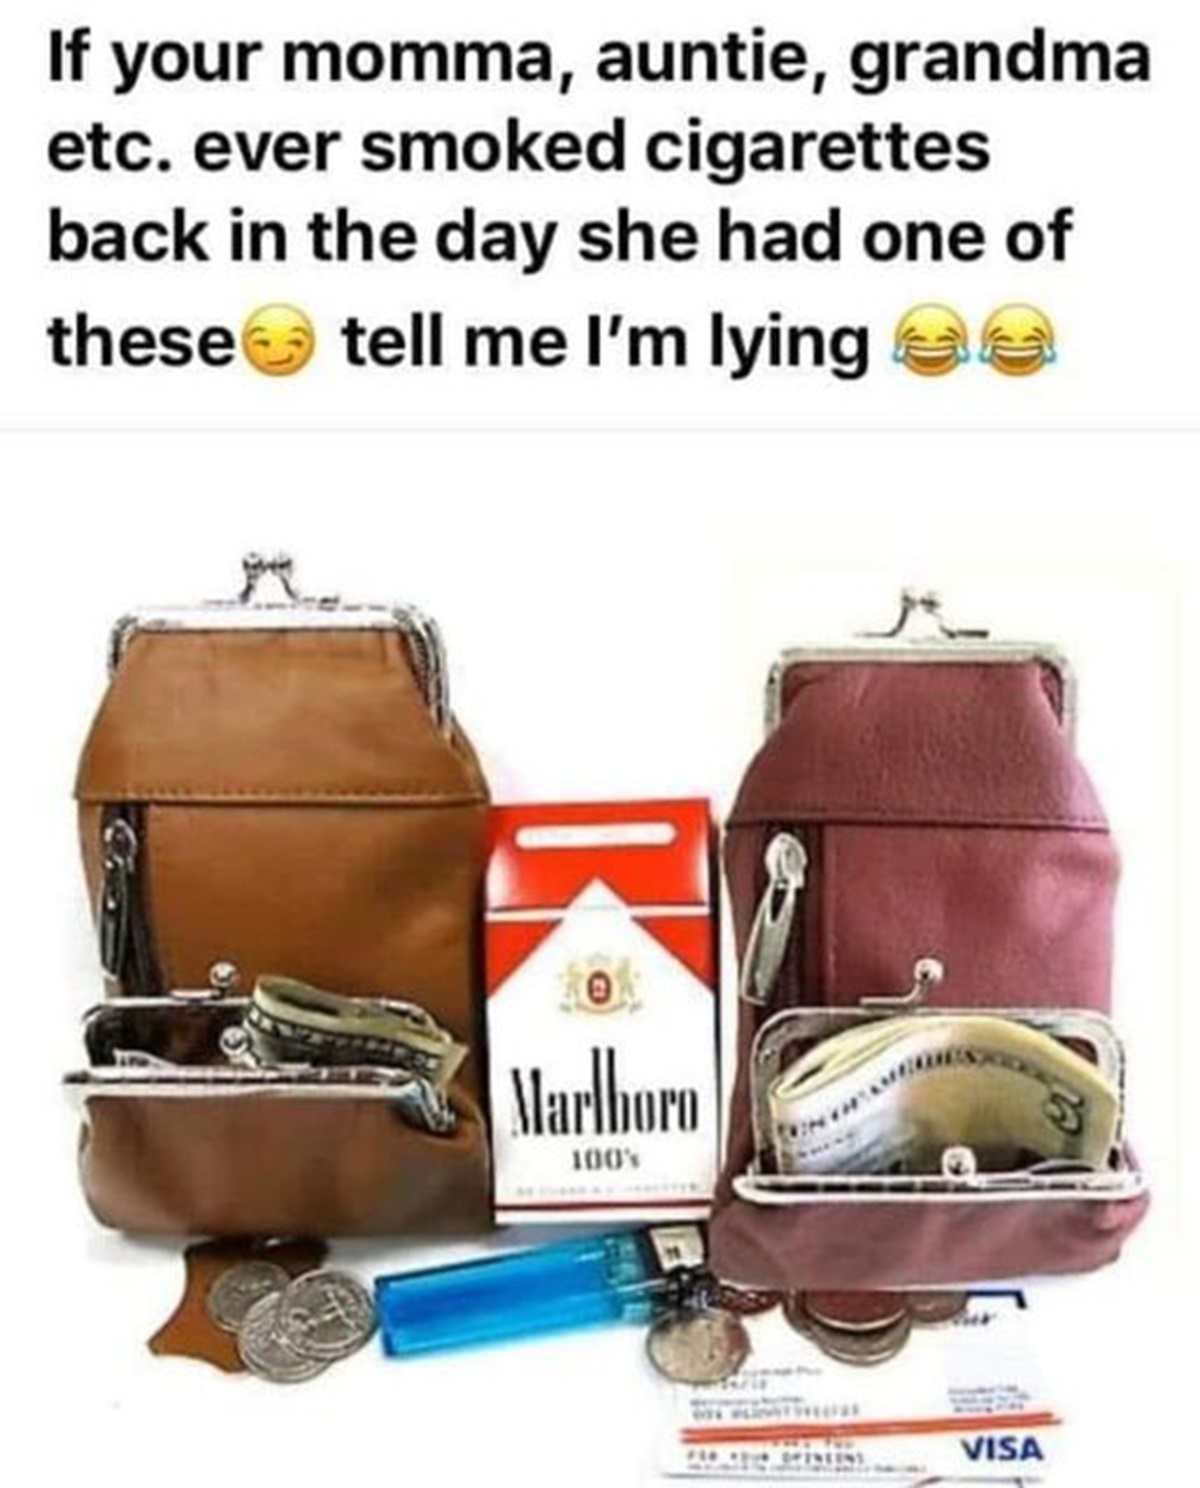 shoulder bag - If your momma, auntie, grandma etc. ever smoked cigarettes back in the day she had one of these tell me I'm lying Marlboro 100% Visa